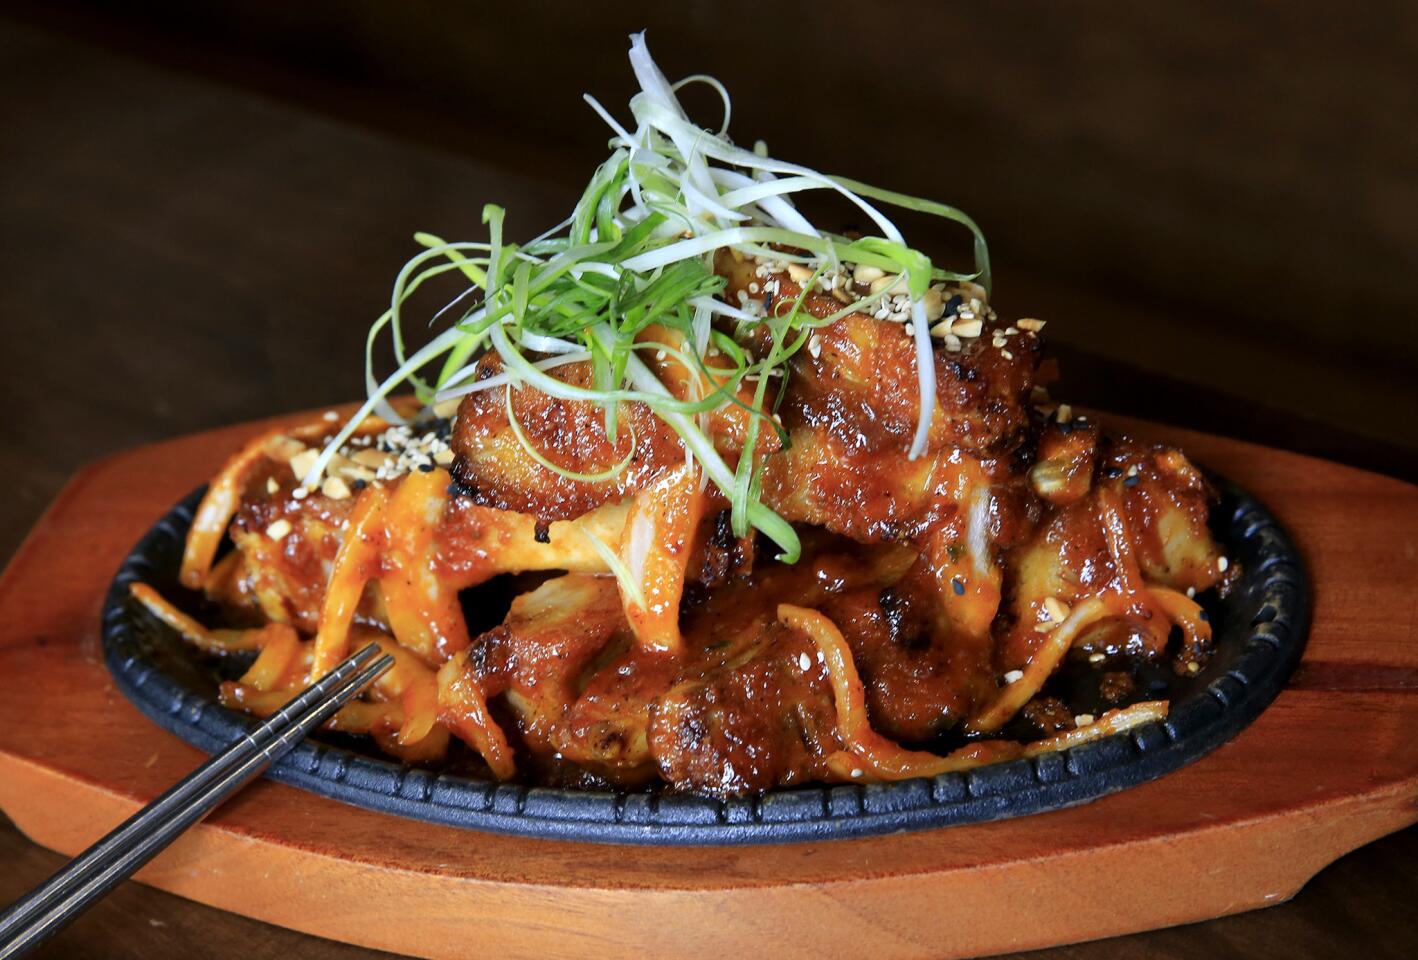 Tricked-out Korean barbecue is the idea at Hanjip in Culver City. Order dishes you don’t see at other joints.